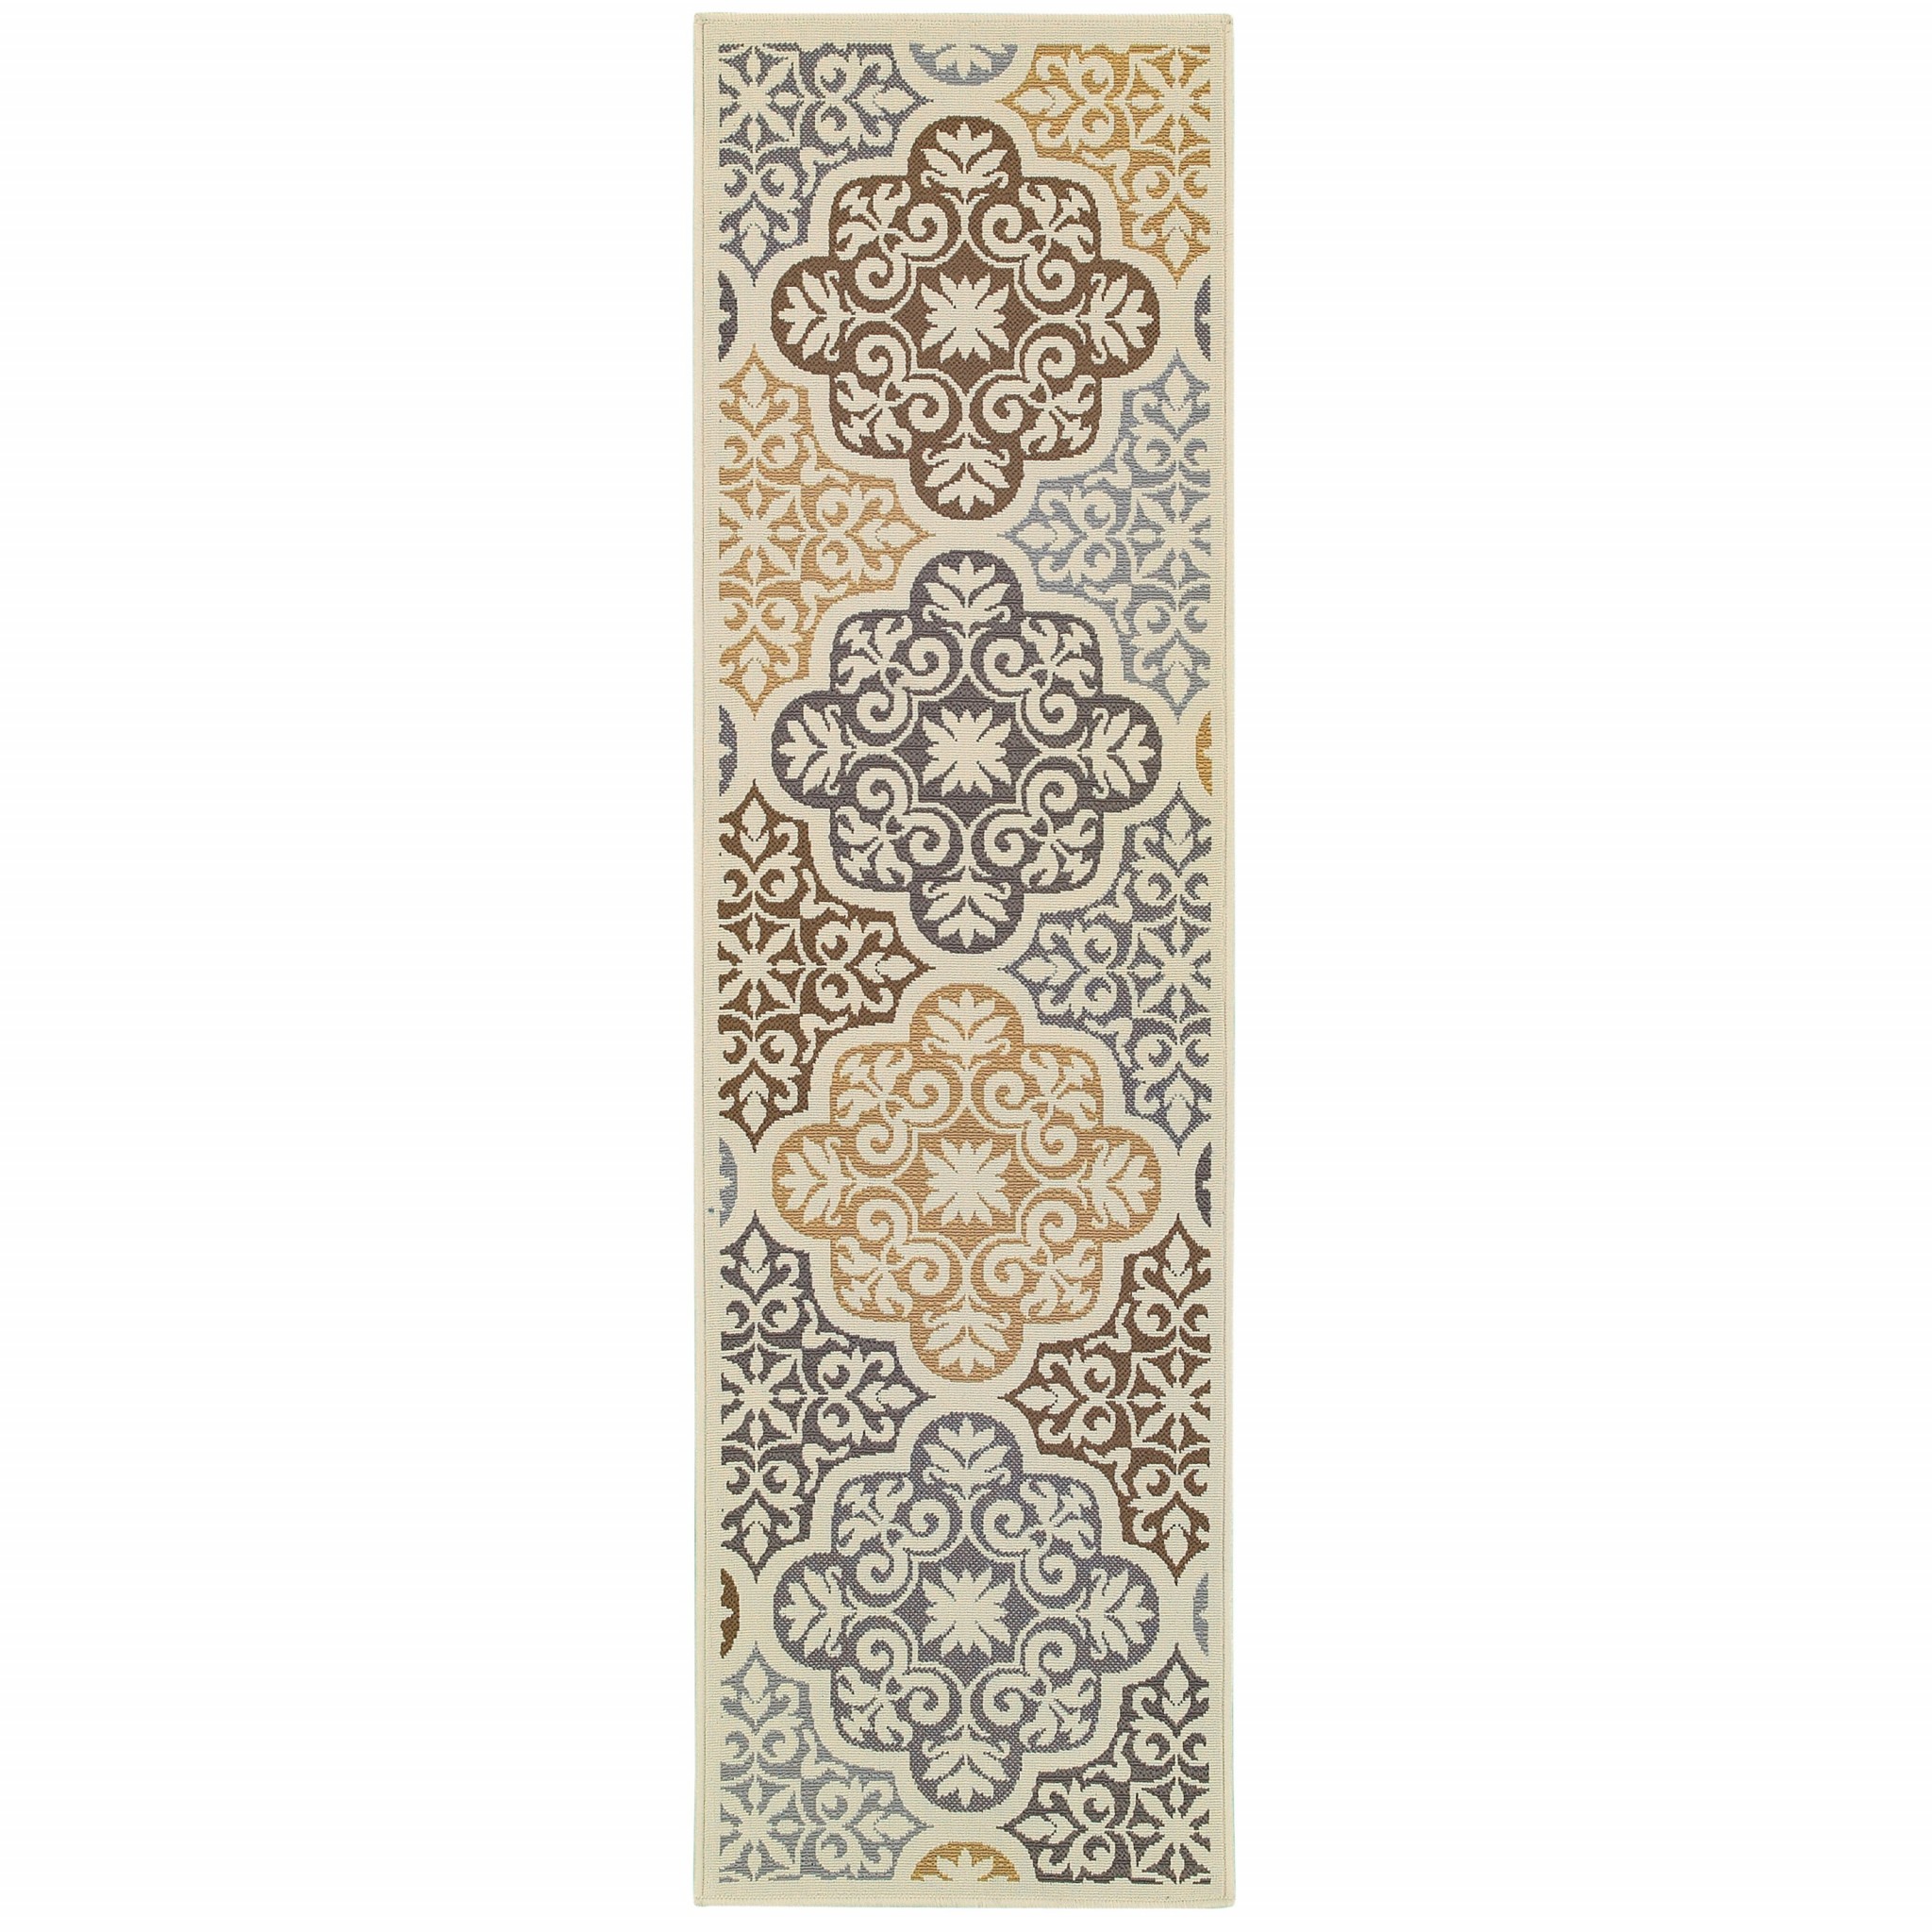 2' X 8' Gray and Ivory Moroccan Indoor Outdoor Area Rug-384189-1